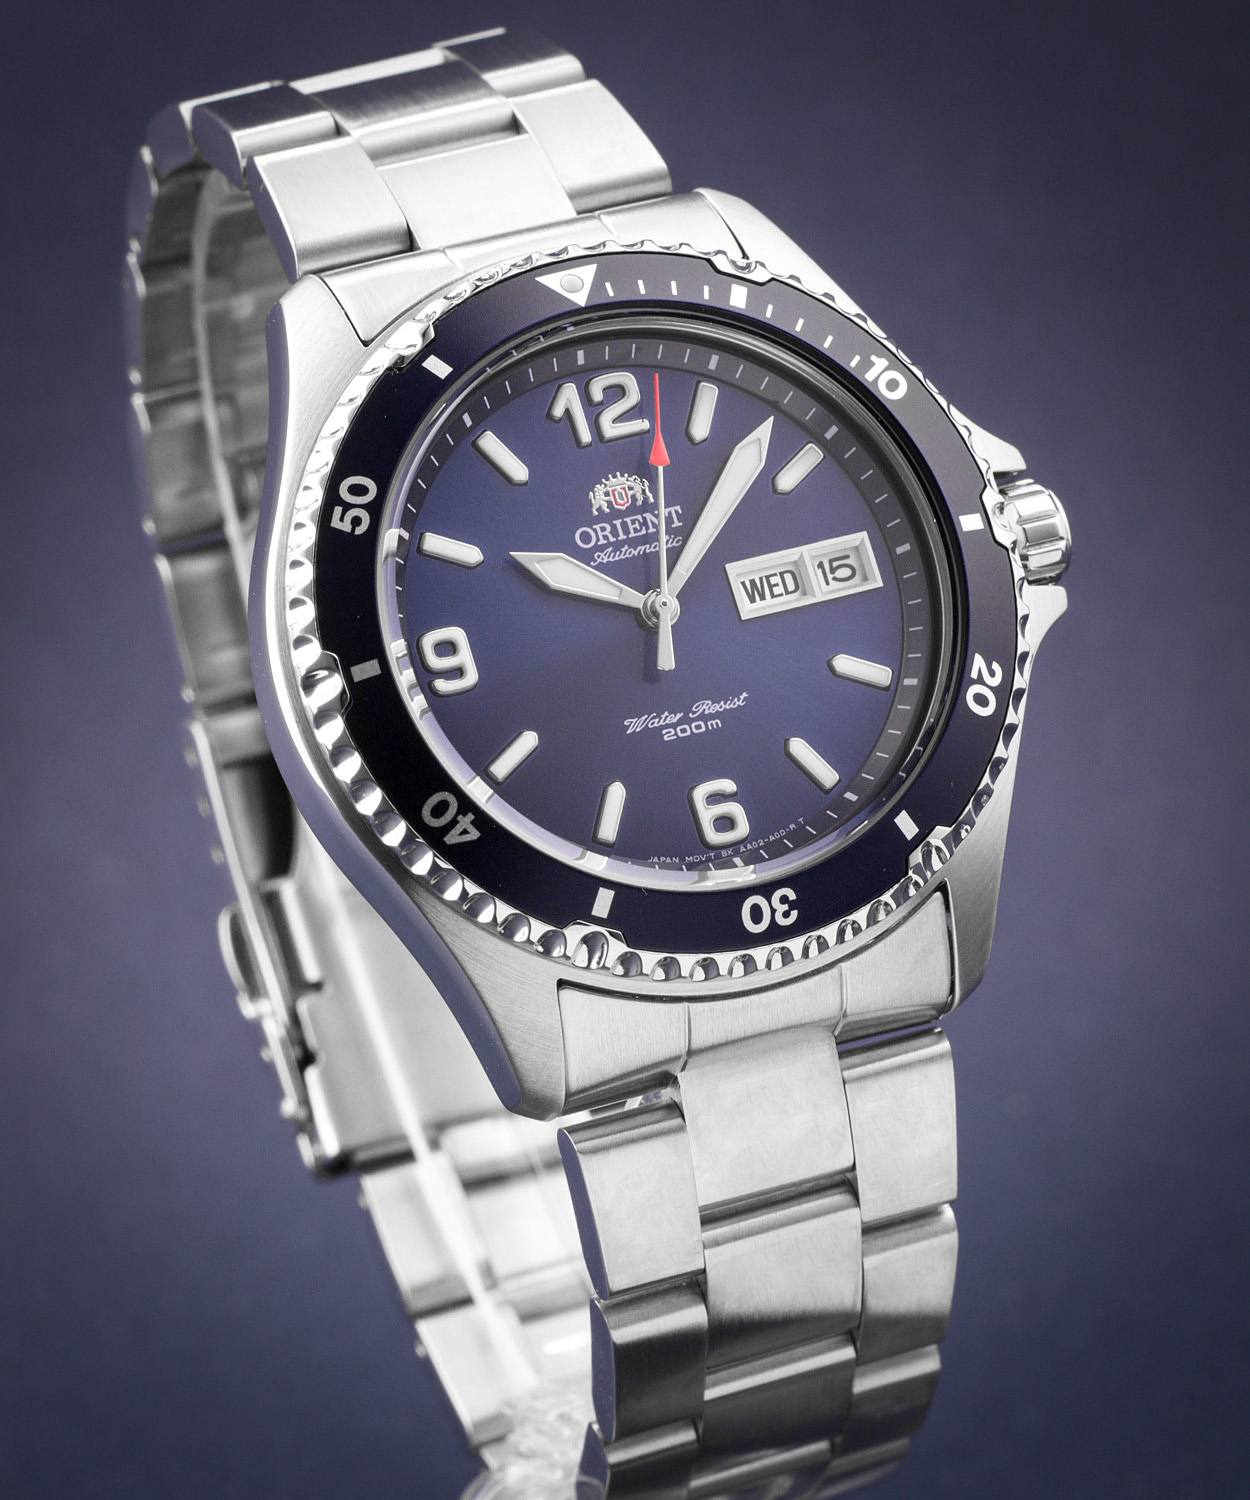 Orient Mako-3 Japanese Automatic/Hand-Winding 200m Diver Style Watch